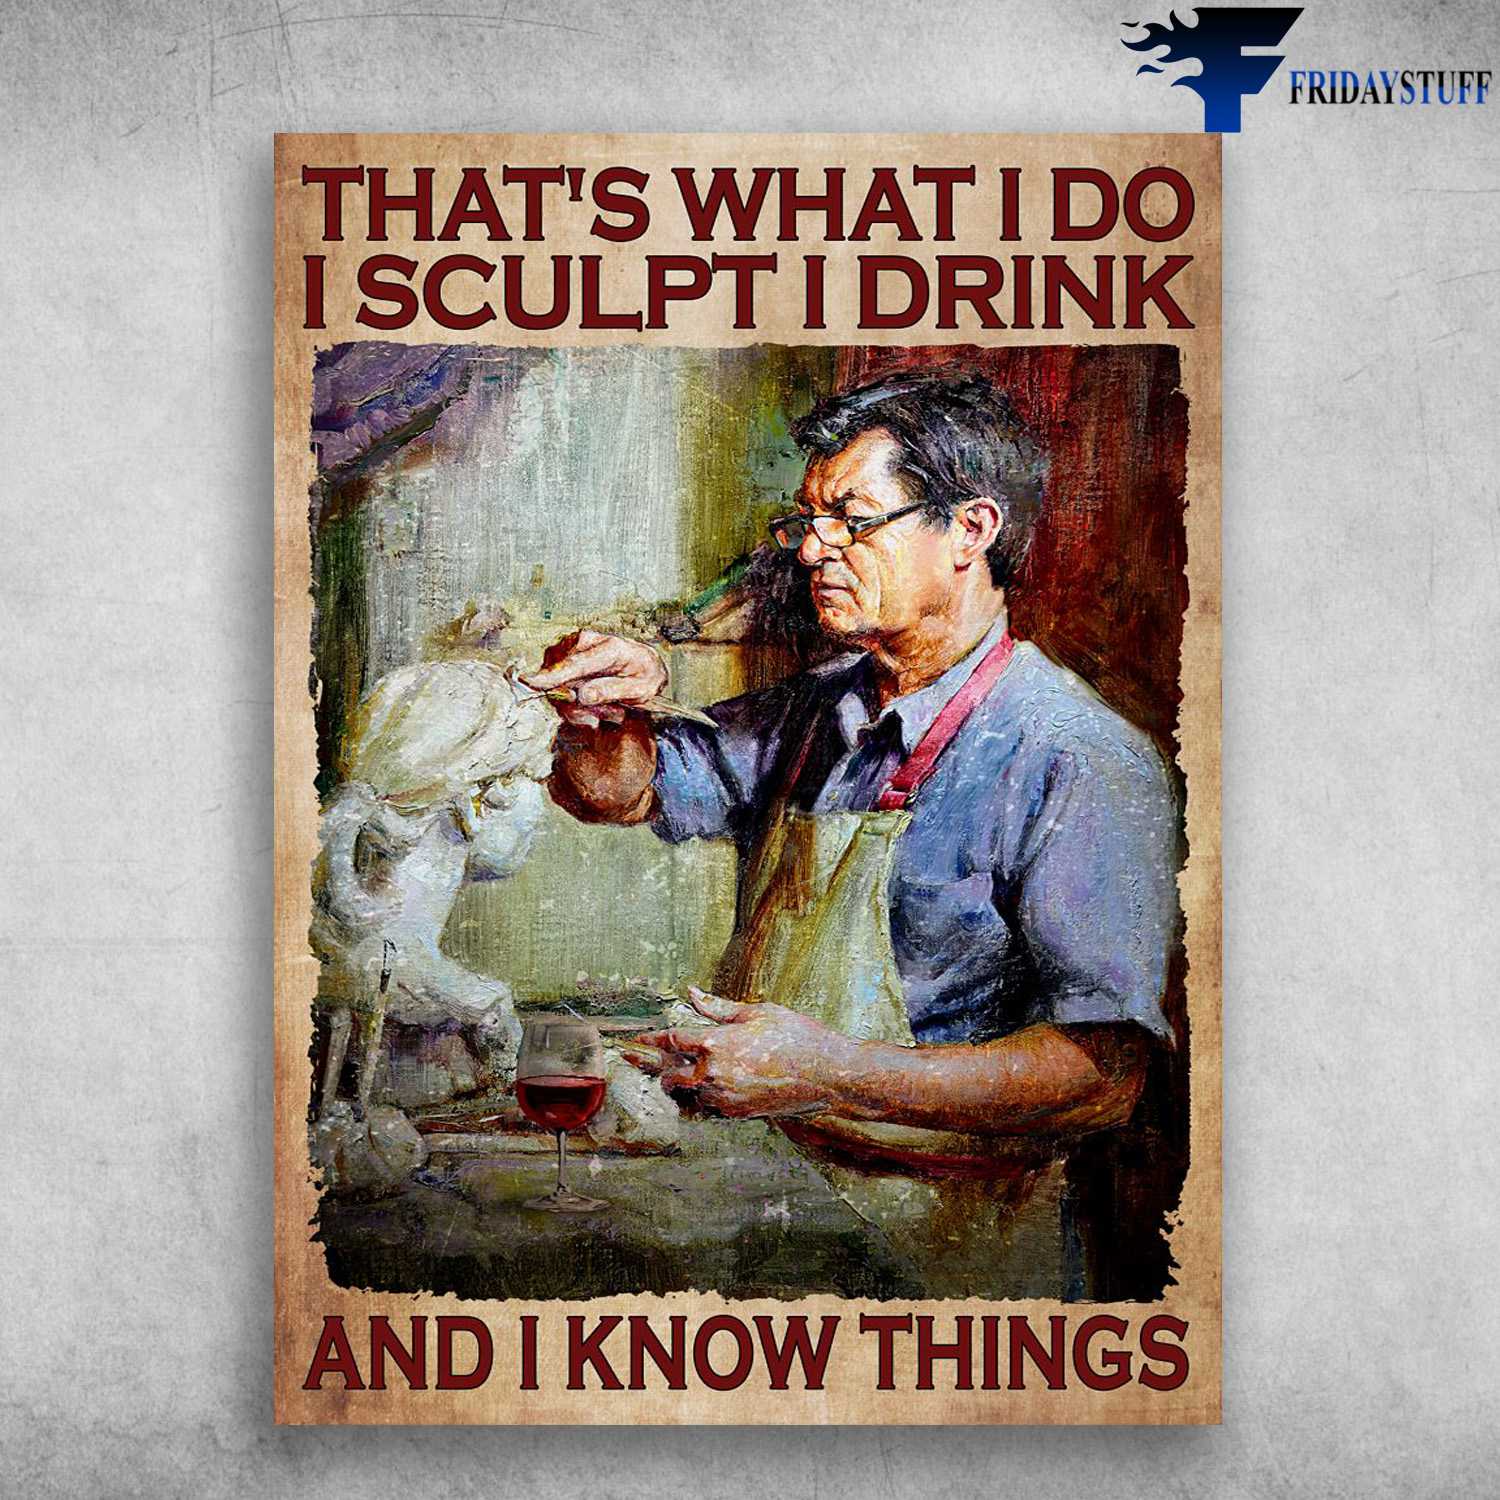 Sculpt Man, Sculpt And Wine - That's What I Do, I Sculpt, I Drink, And I Know Things, Gift For Sculpt Lover